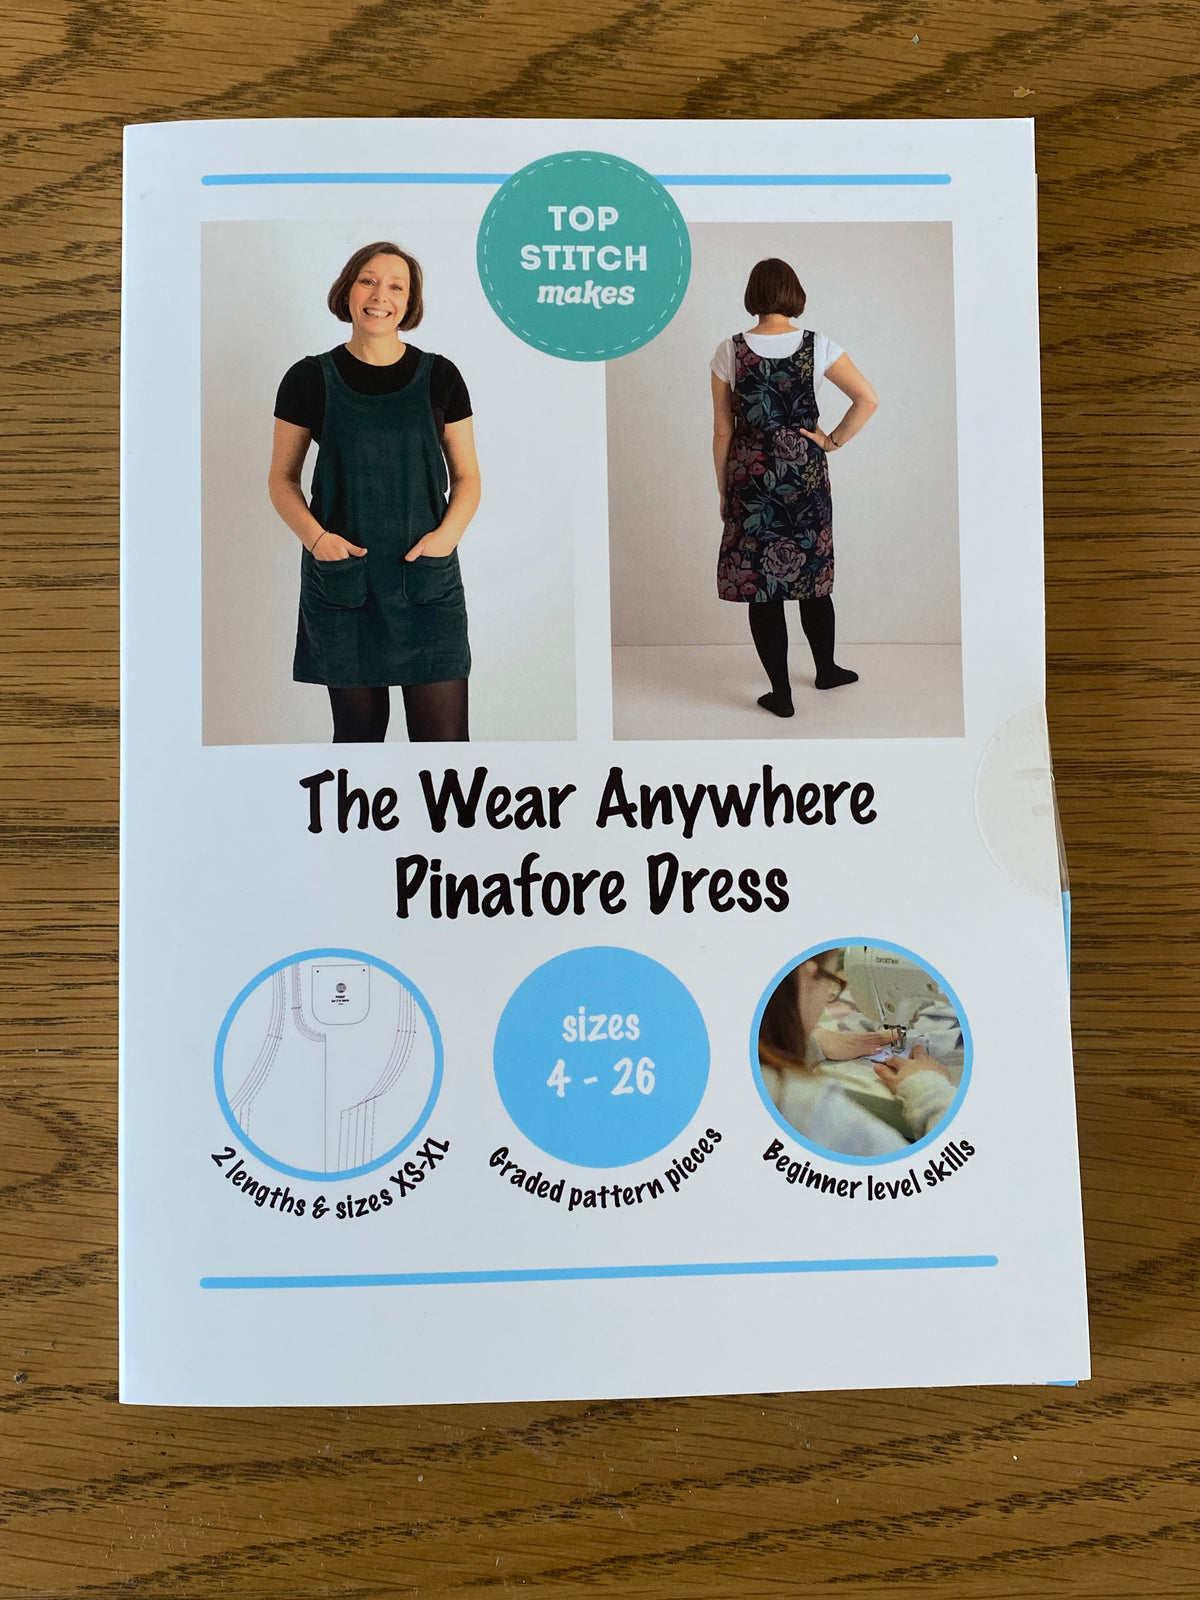 Top Stitch Makes - The Wear Anywhere Pinafore